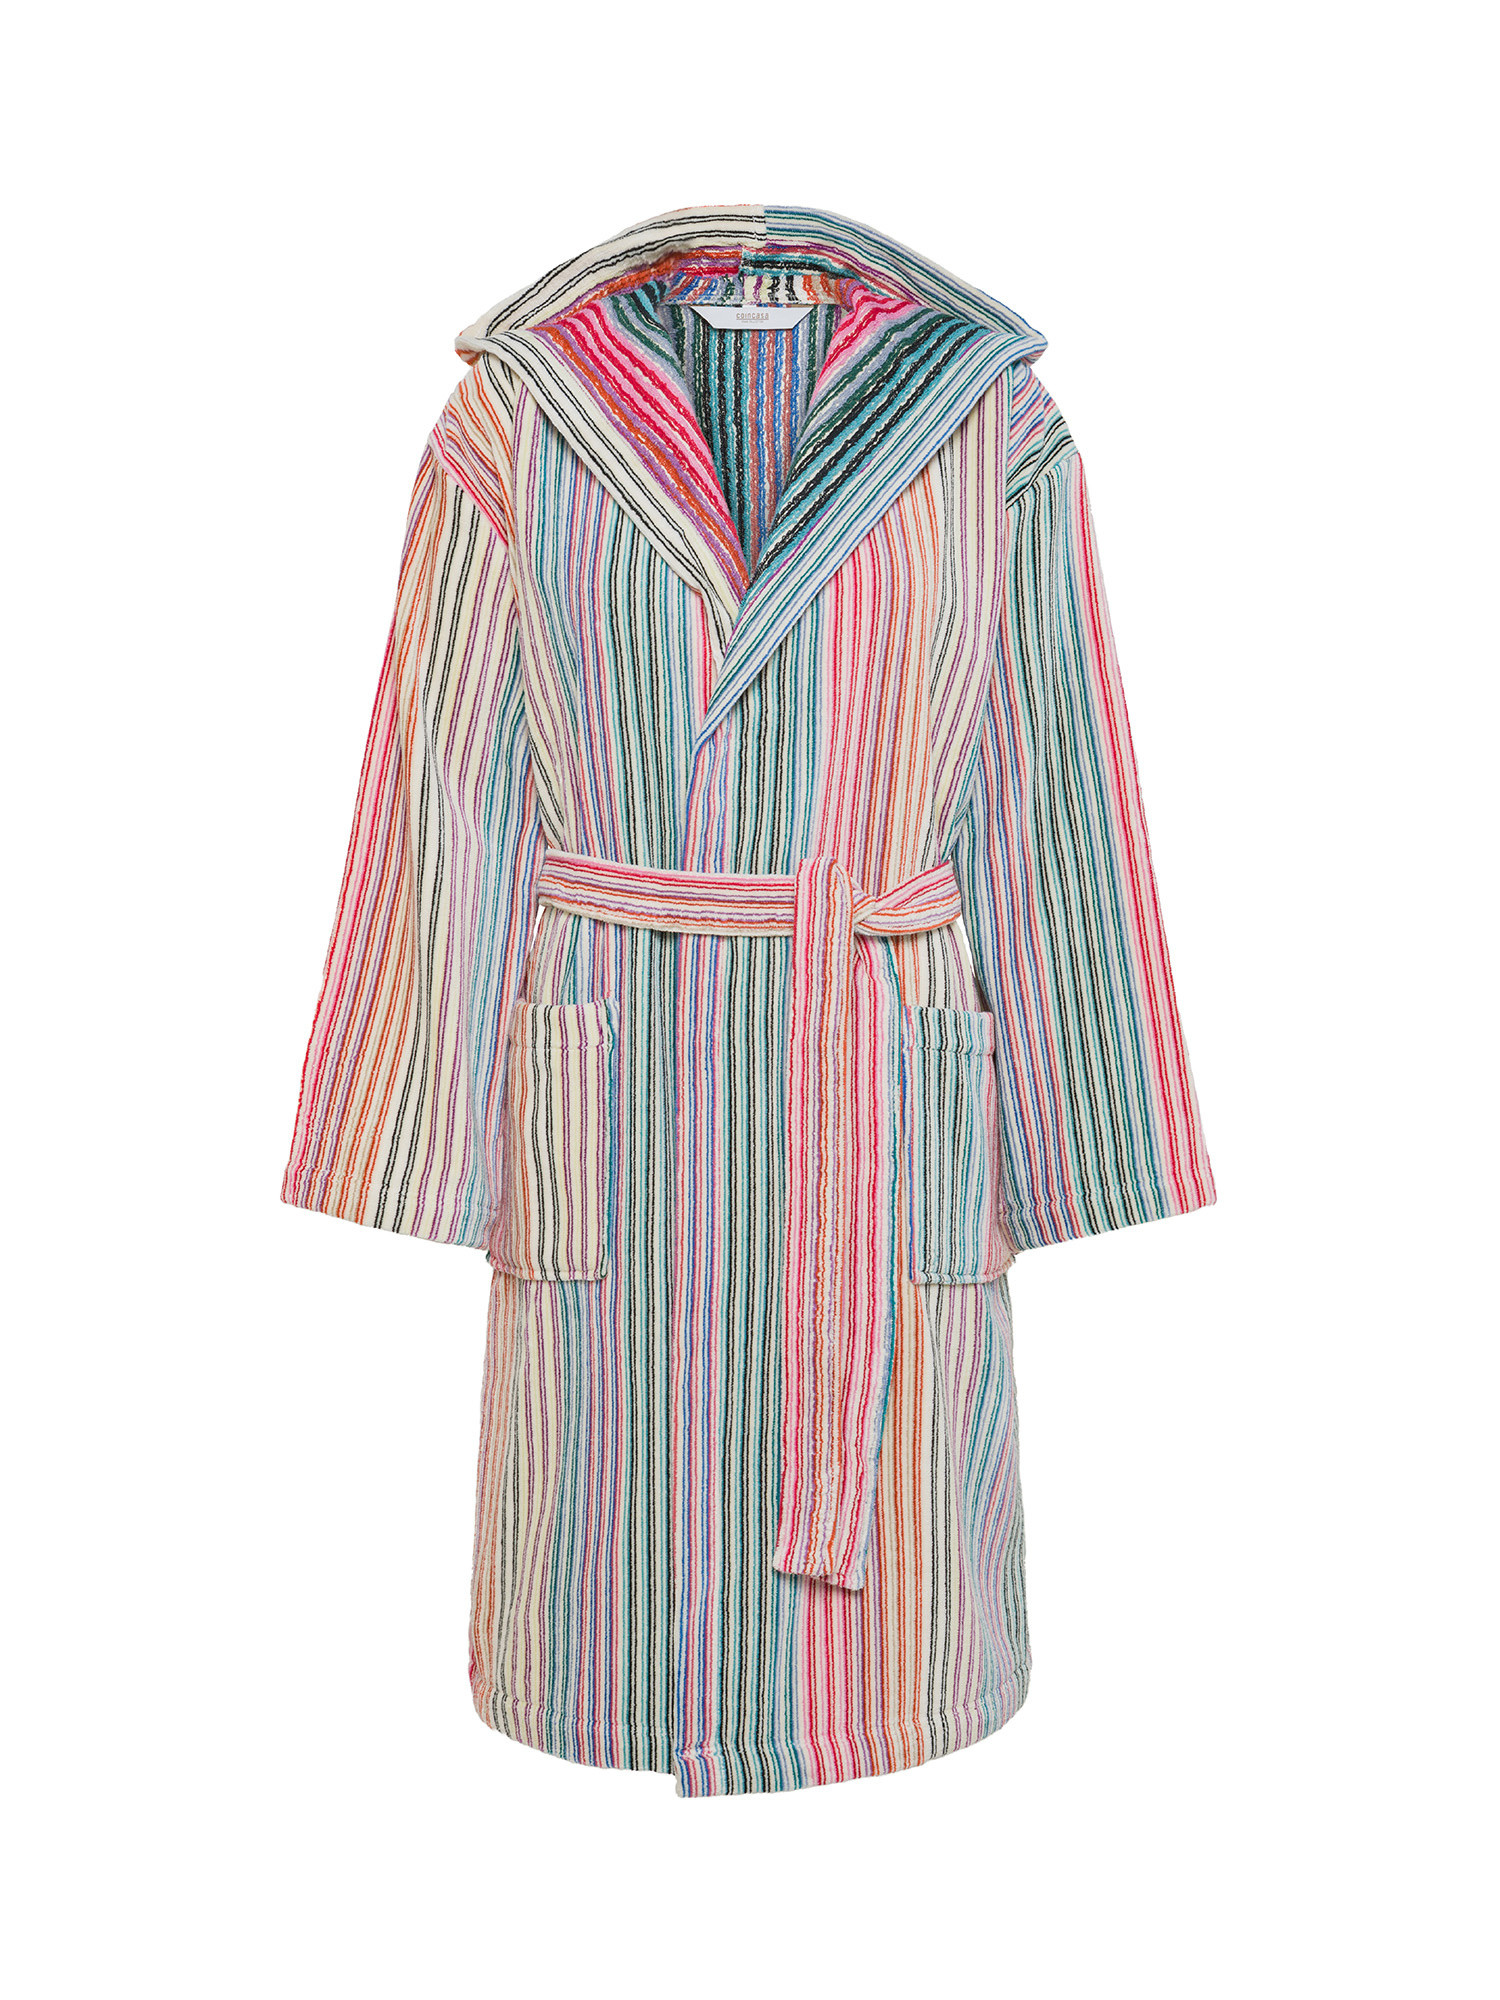 Cotton terry bathrobe striped pattern, Multicolor, large image number 0